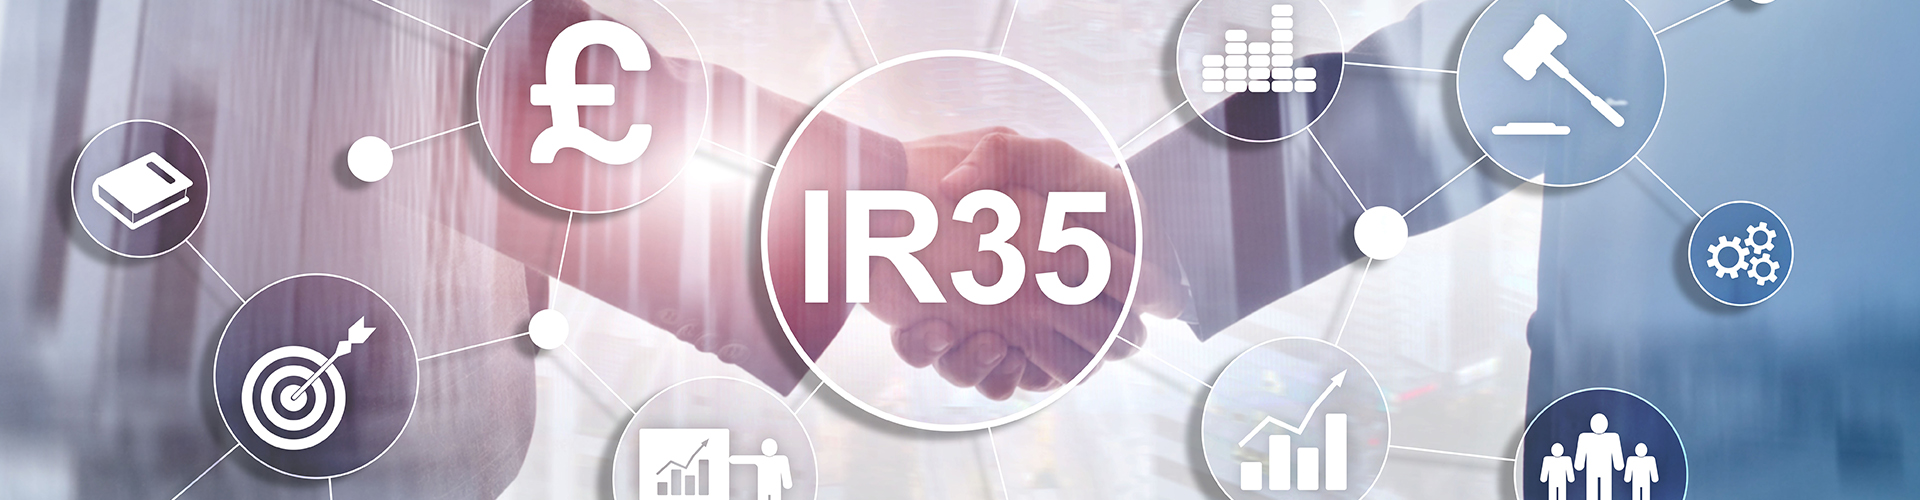 8 Months to IR35 in Private Sector-Action Needed!